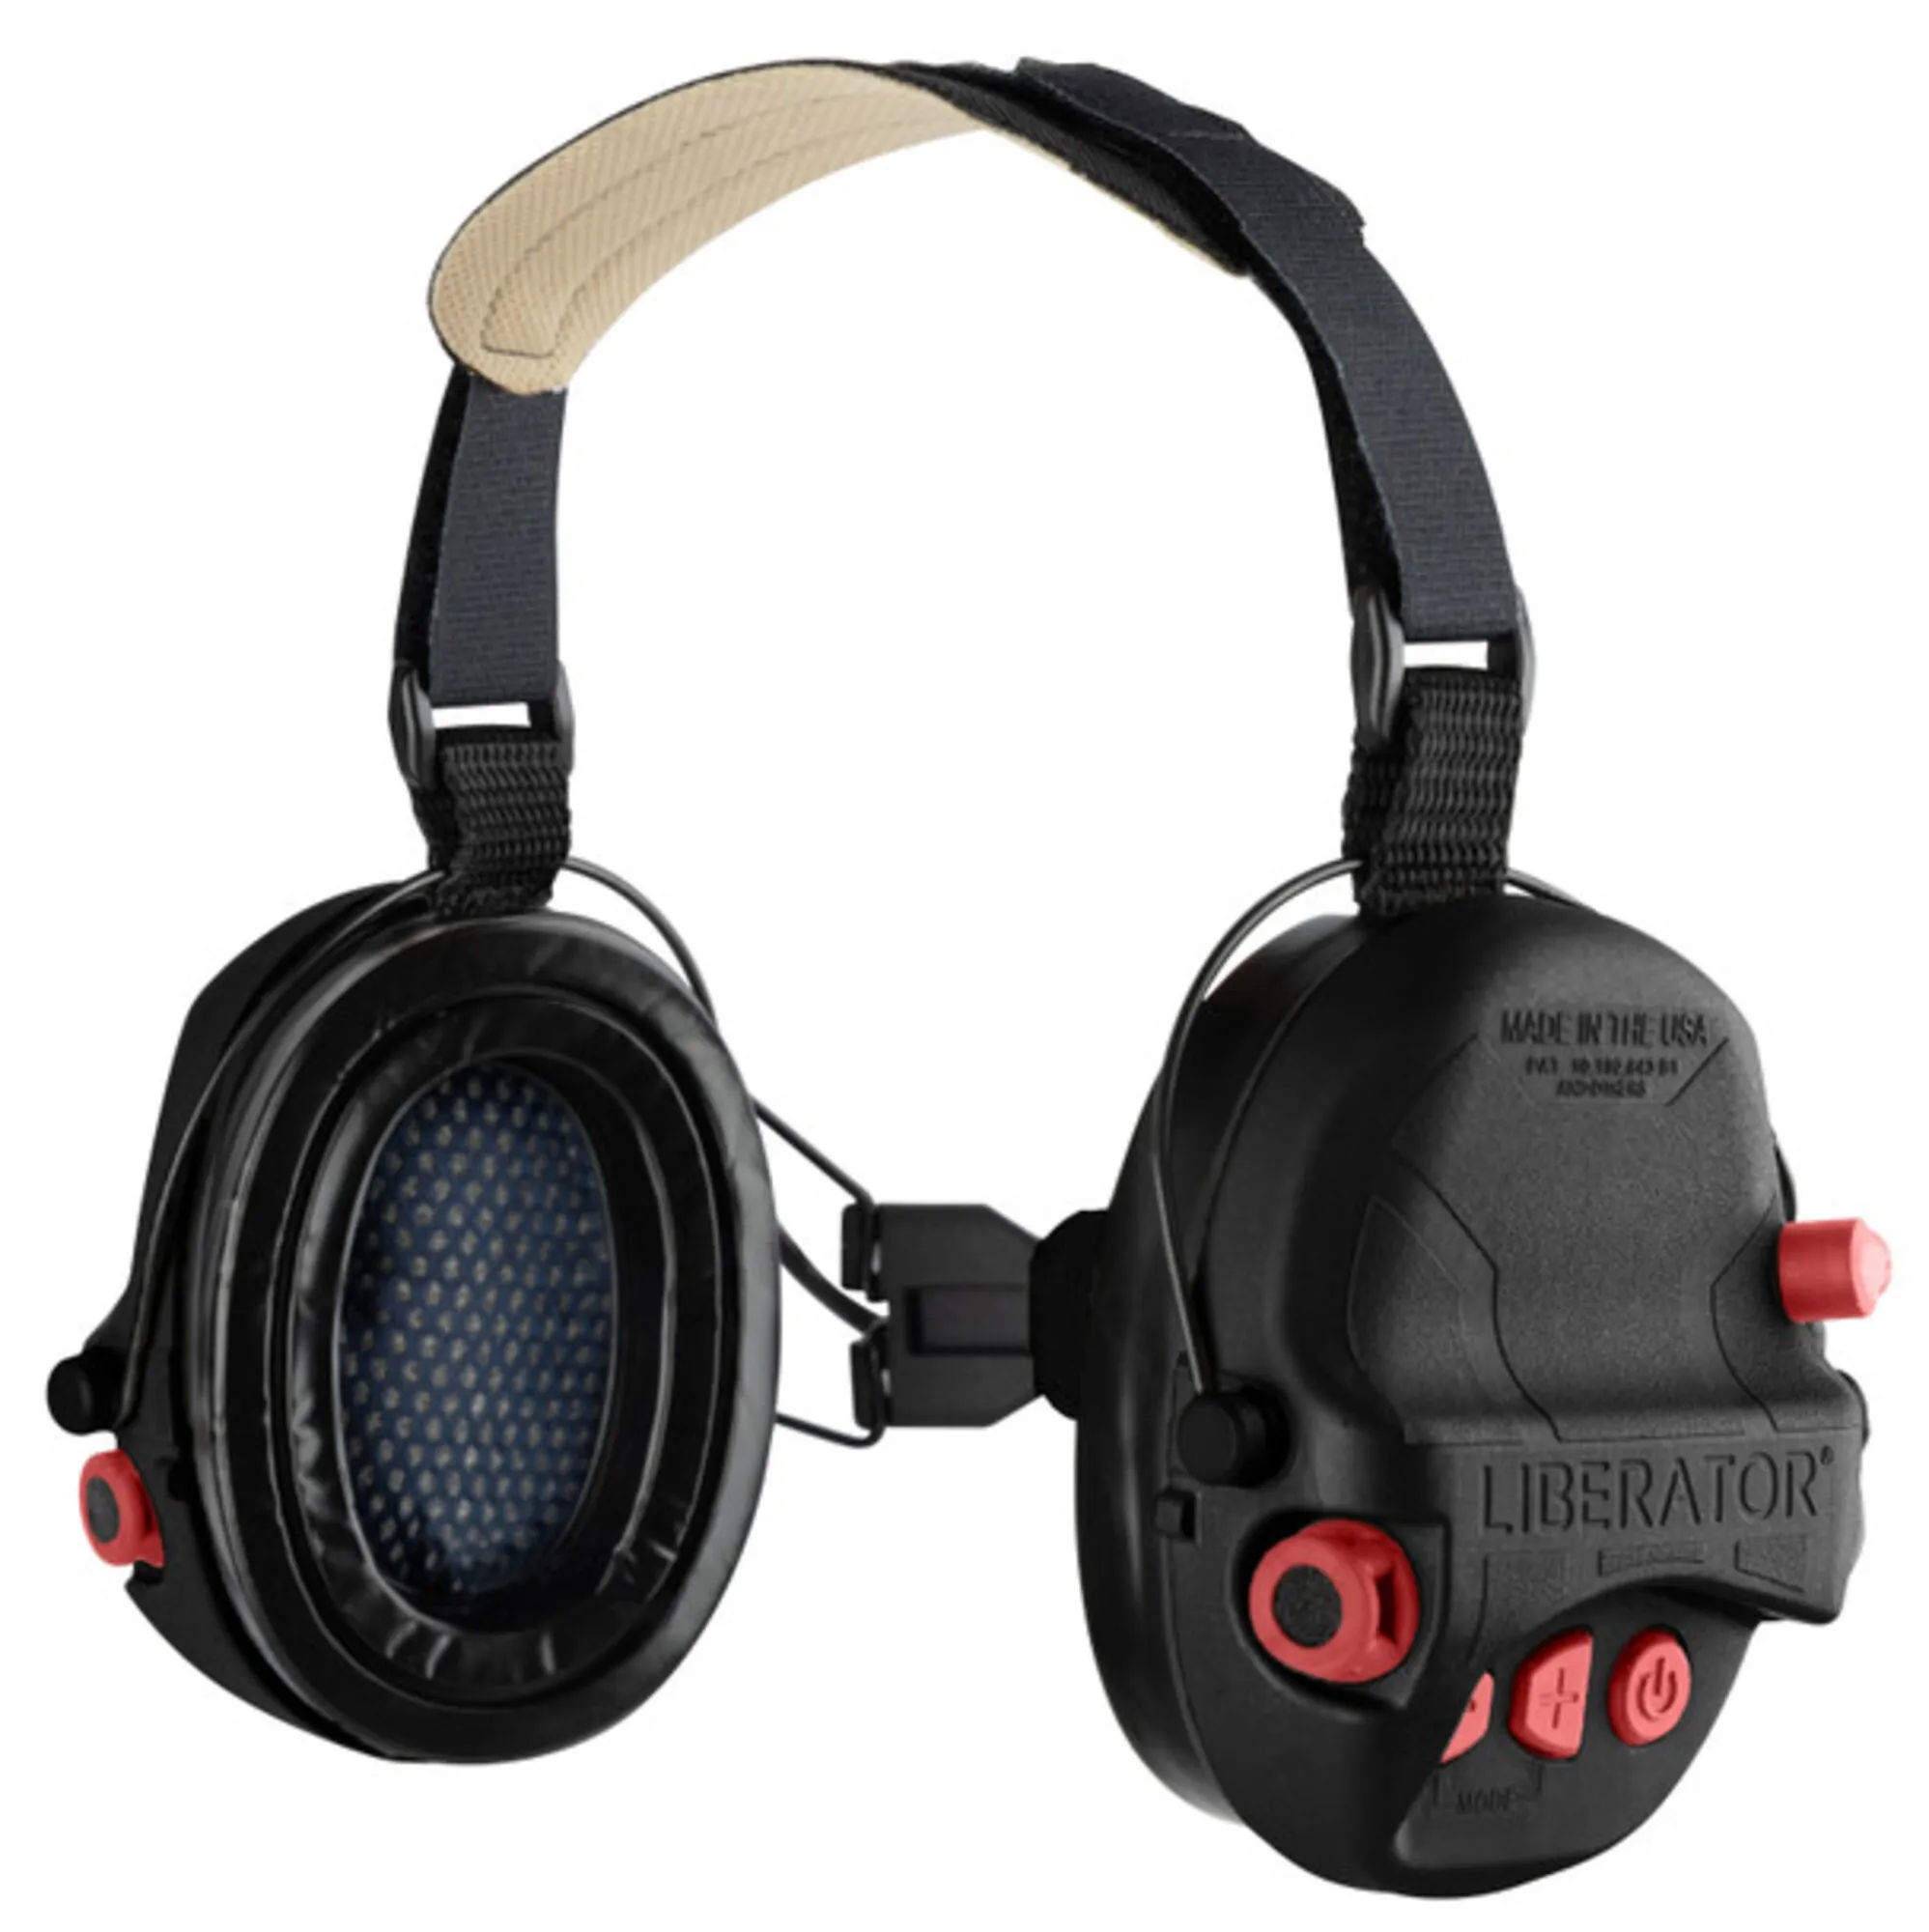 Safariland Liberator HP 2.0 Hearing Protection with BTH and Team Wendy Helmet Mount in Black/Red